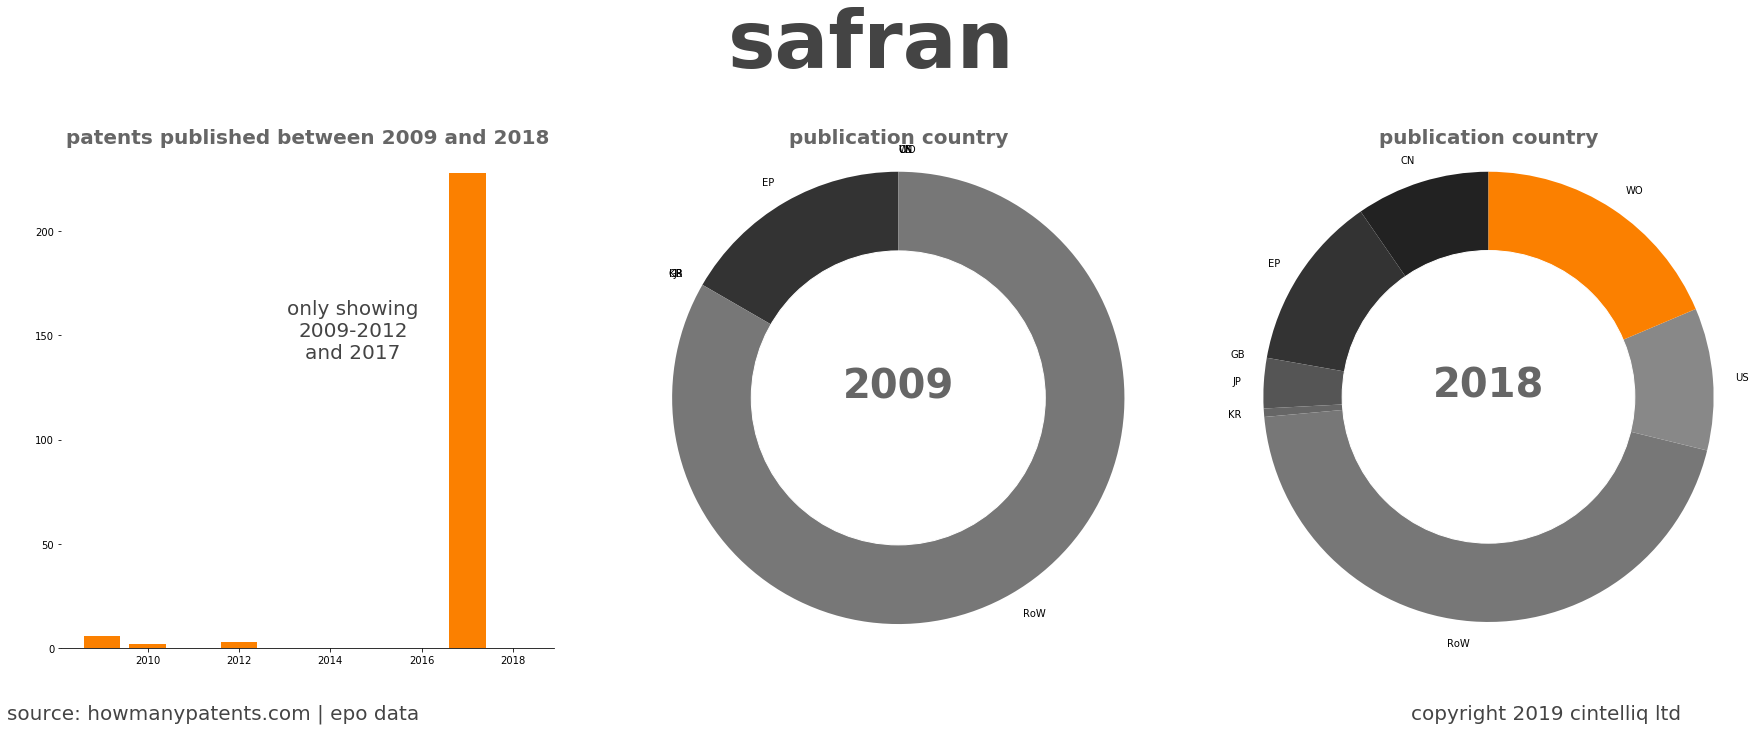 summary of patents for Safran